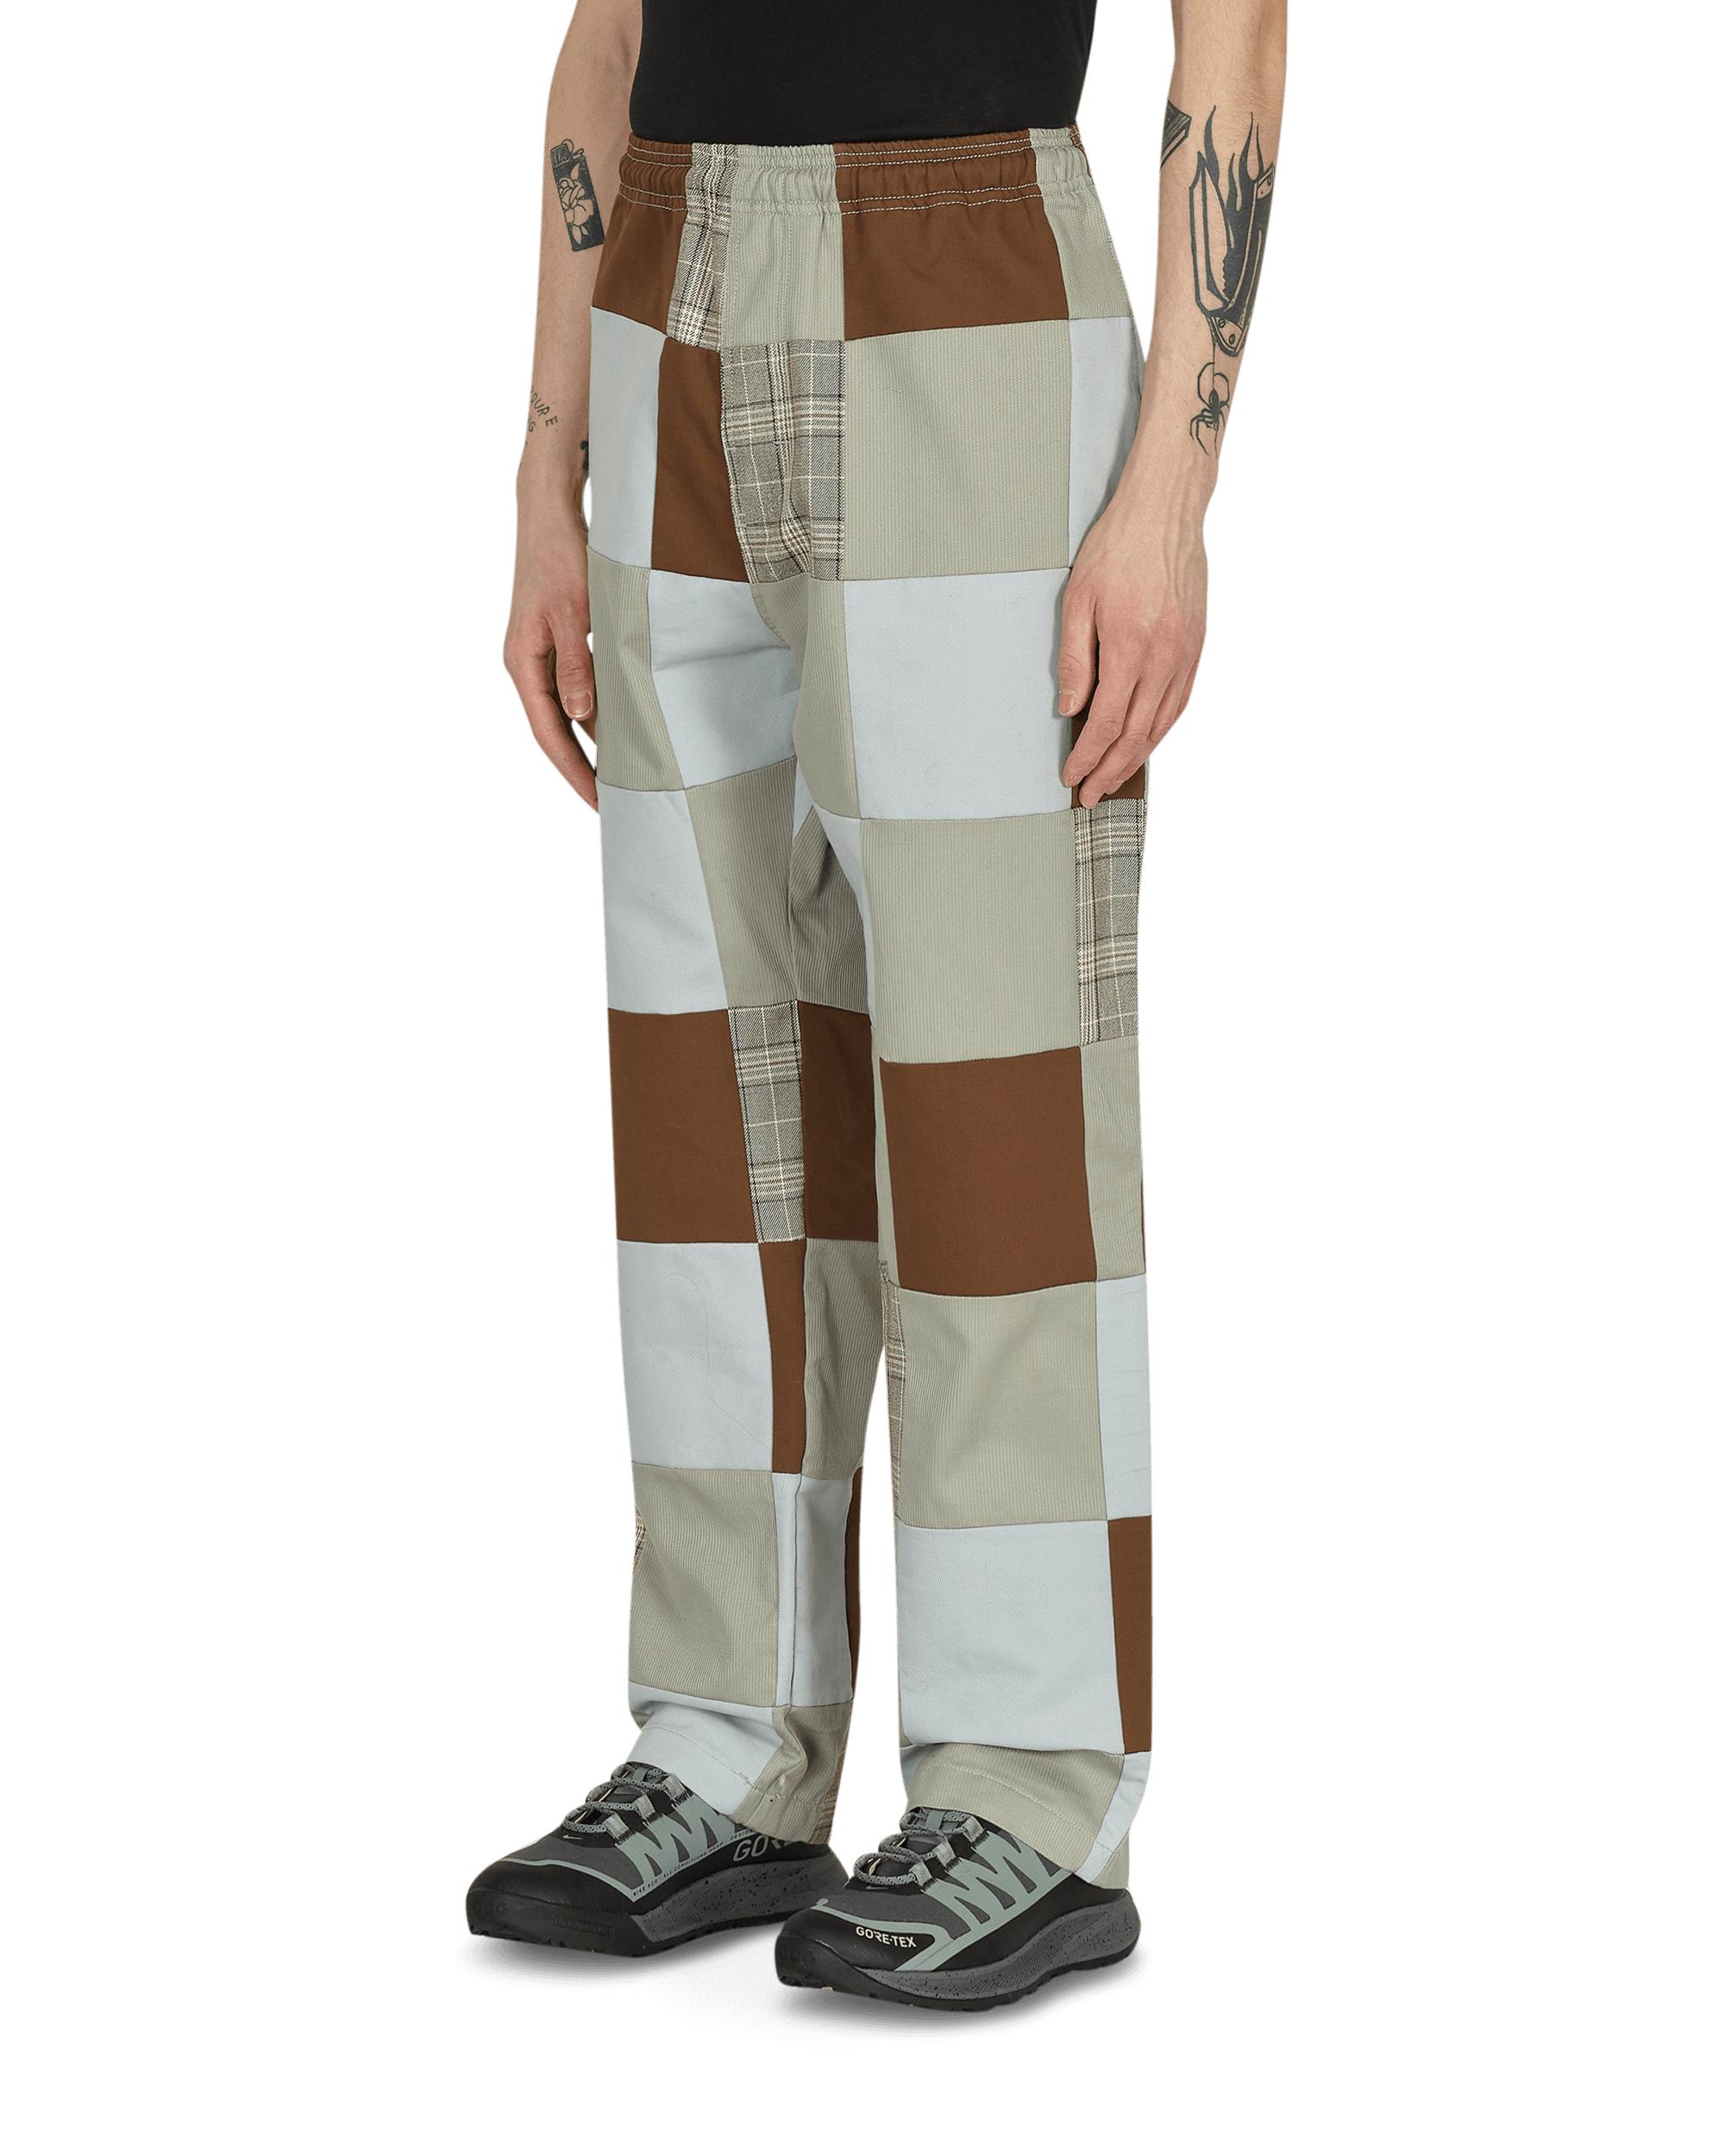 Stussy Cotton Patchwork Beach Pants in Gray for Men - Lyst